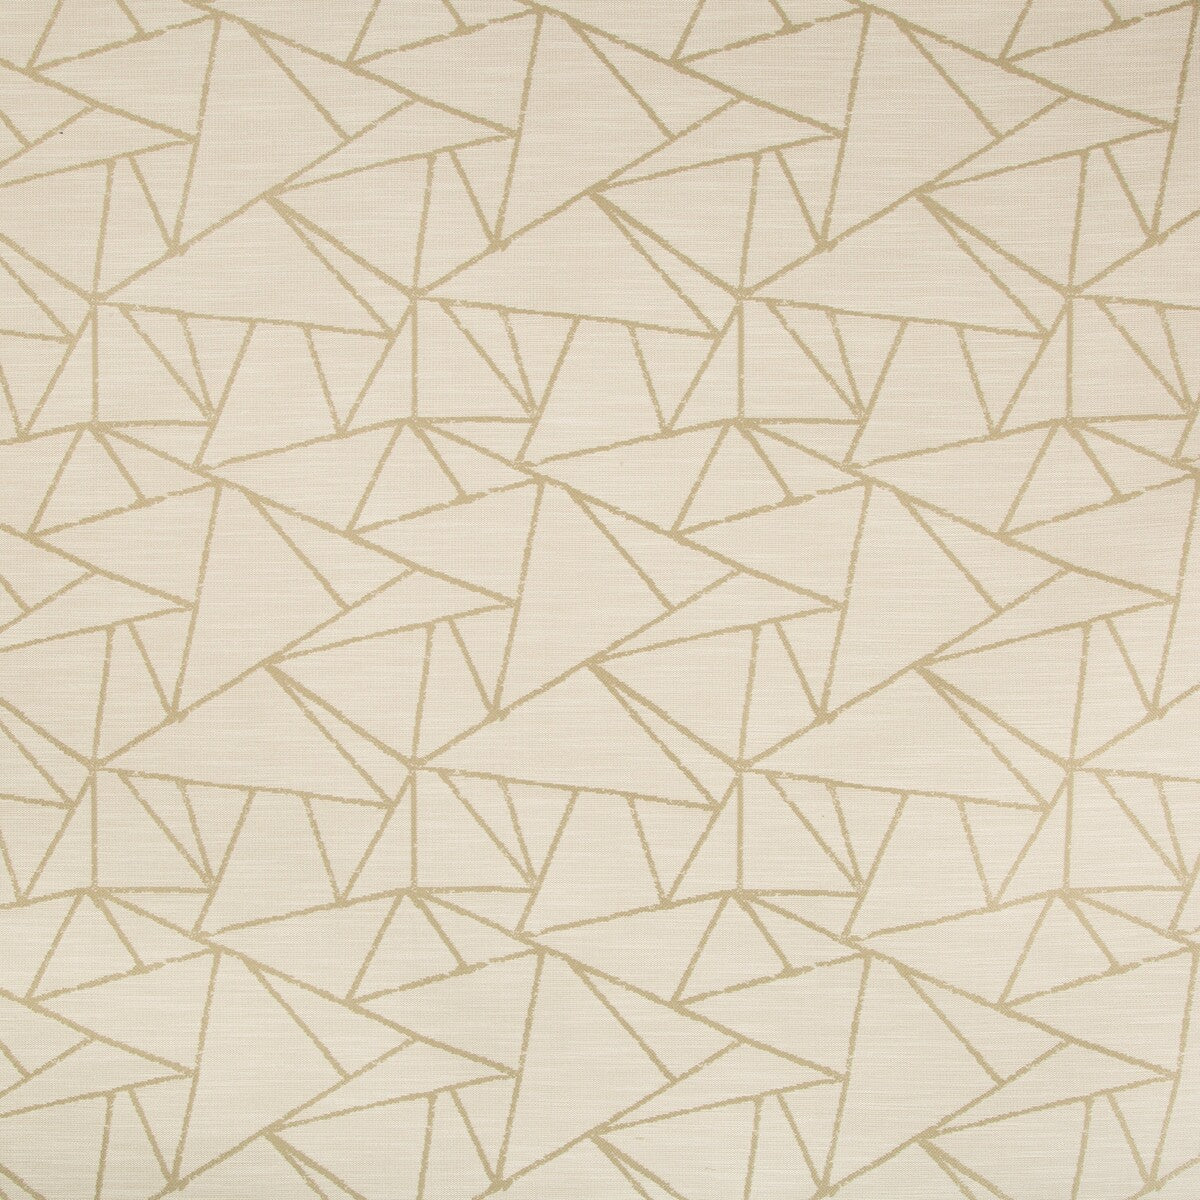 Kravet Design fabric in 35001-16 color - pattern 35001.16.0 - by Kravet Design in the Performance Crypton Home collection